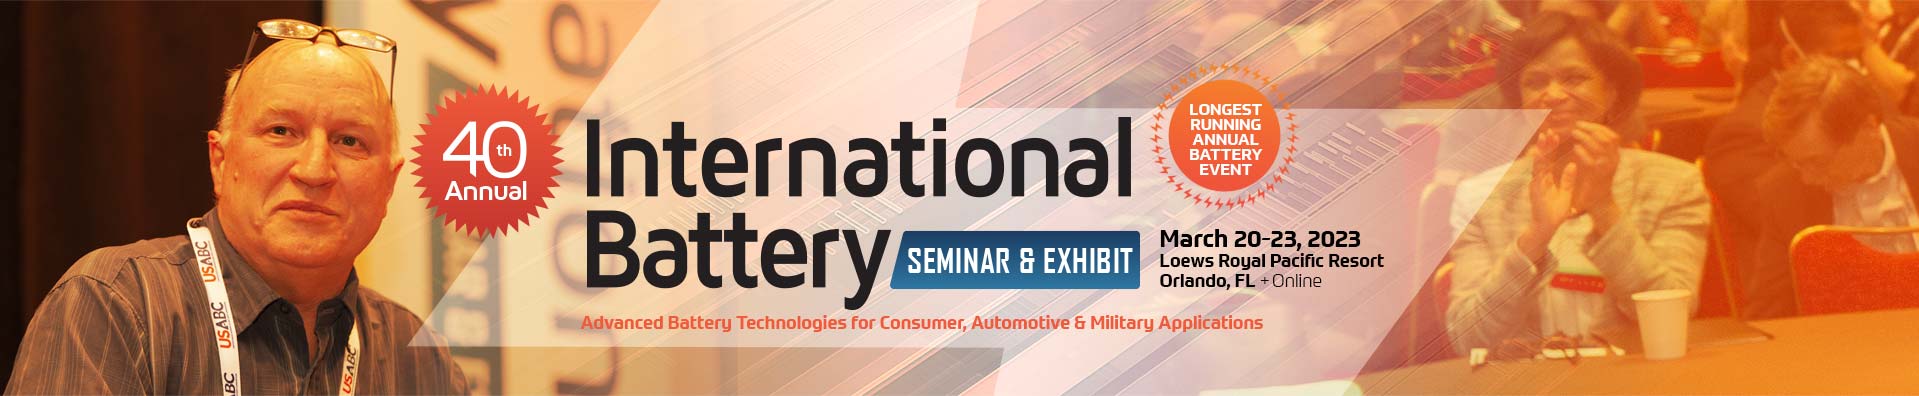 International Battery Conference Siminar and Exhibit - March 21-23, 2023 - Orlando, FL